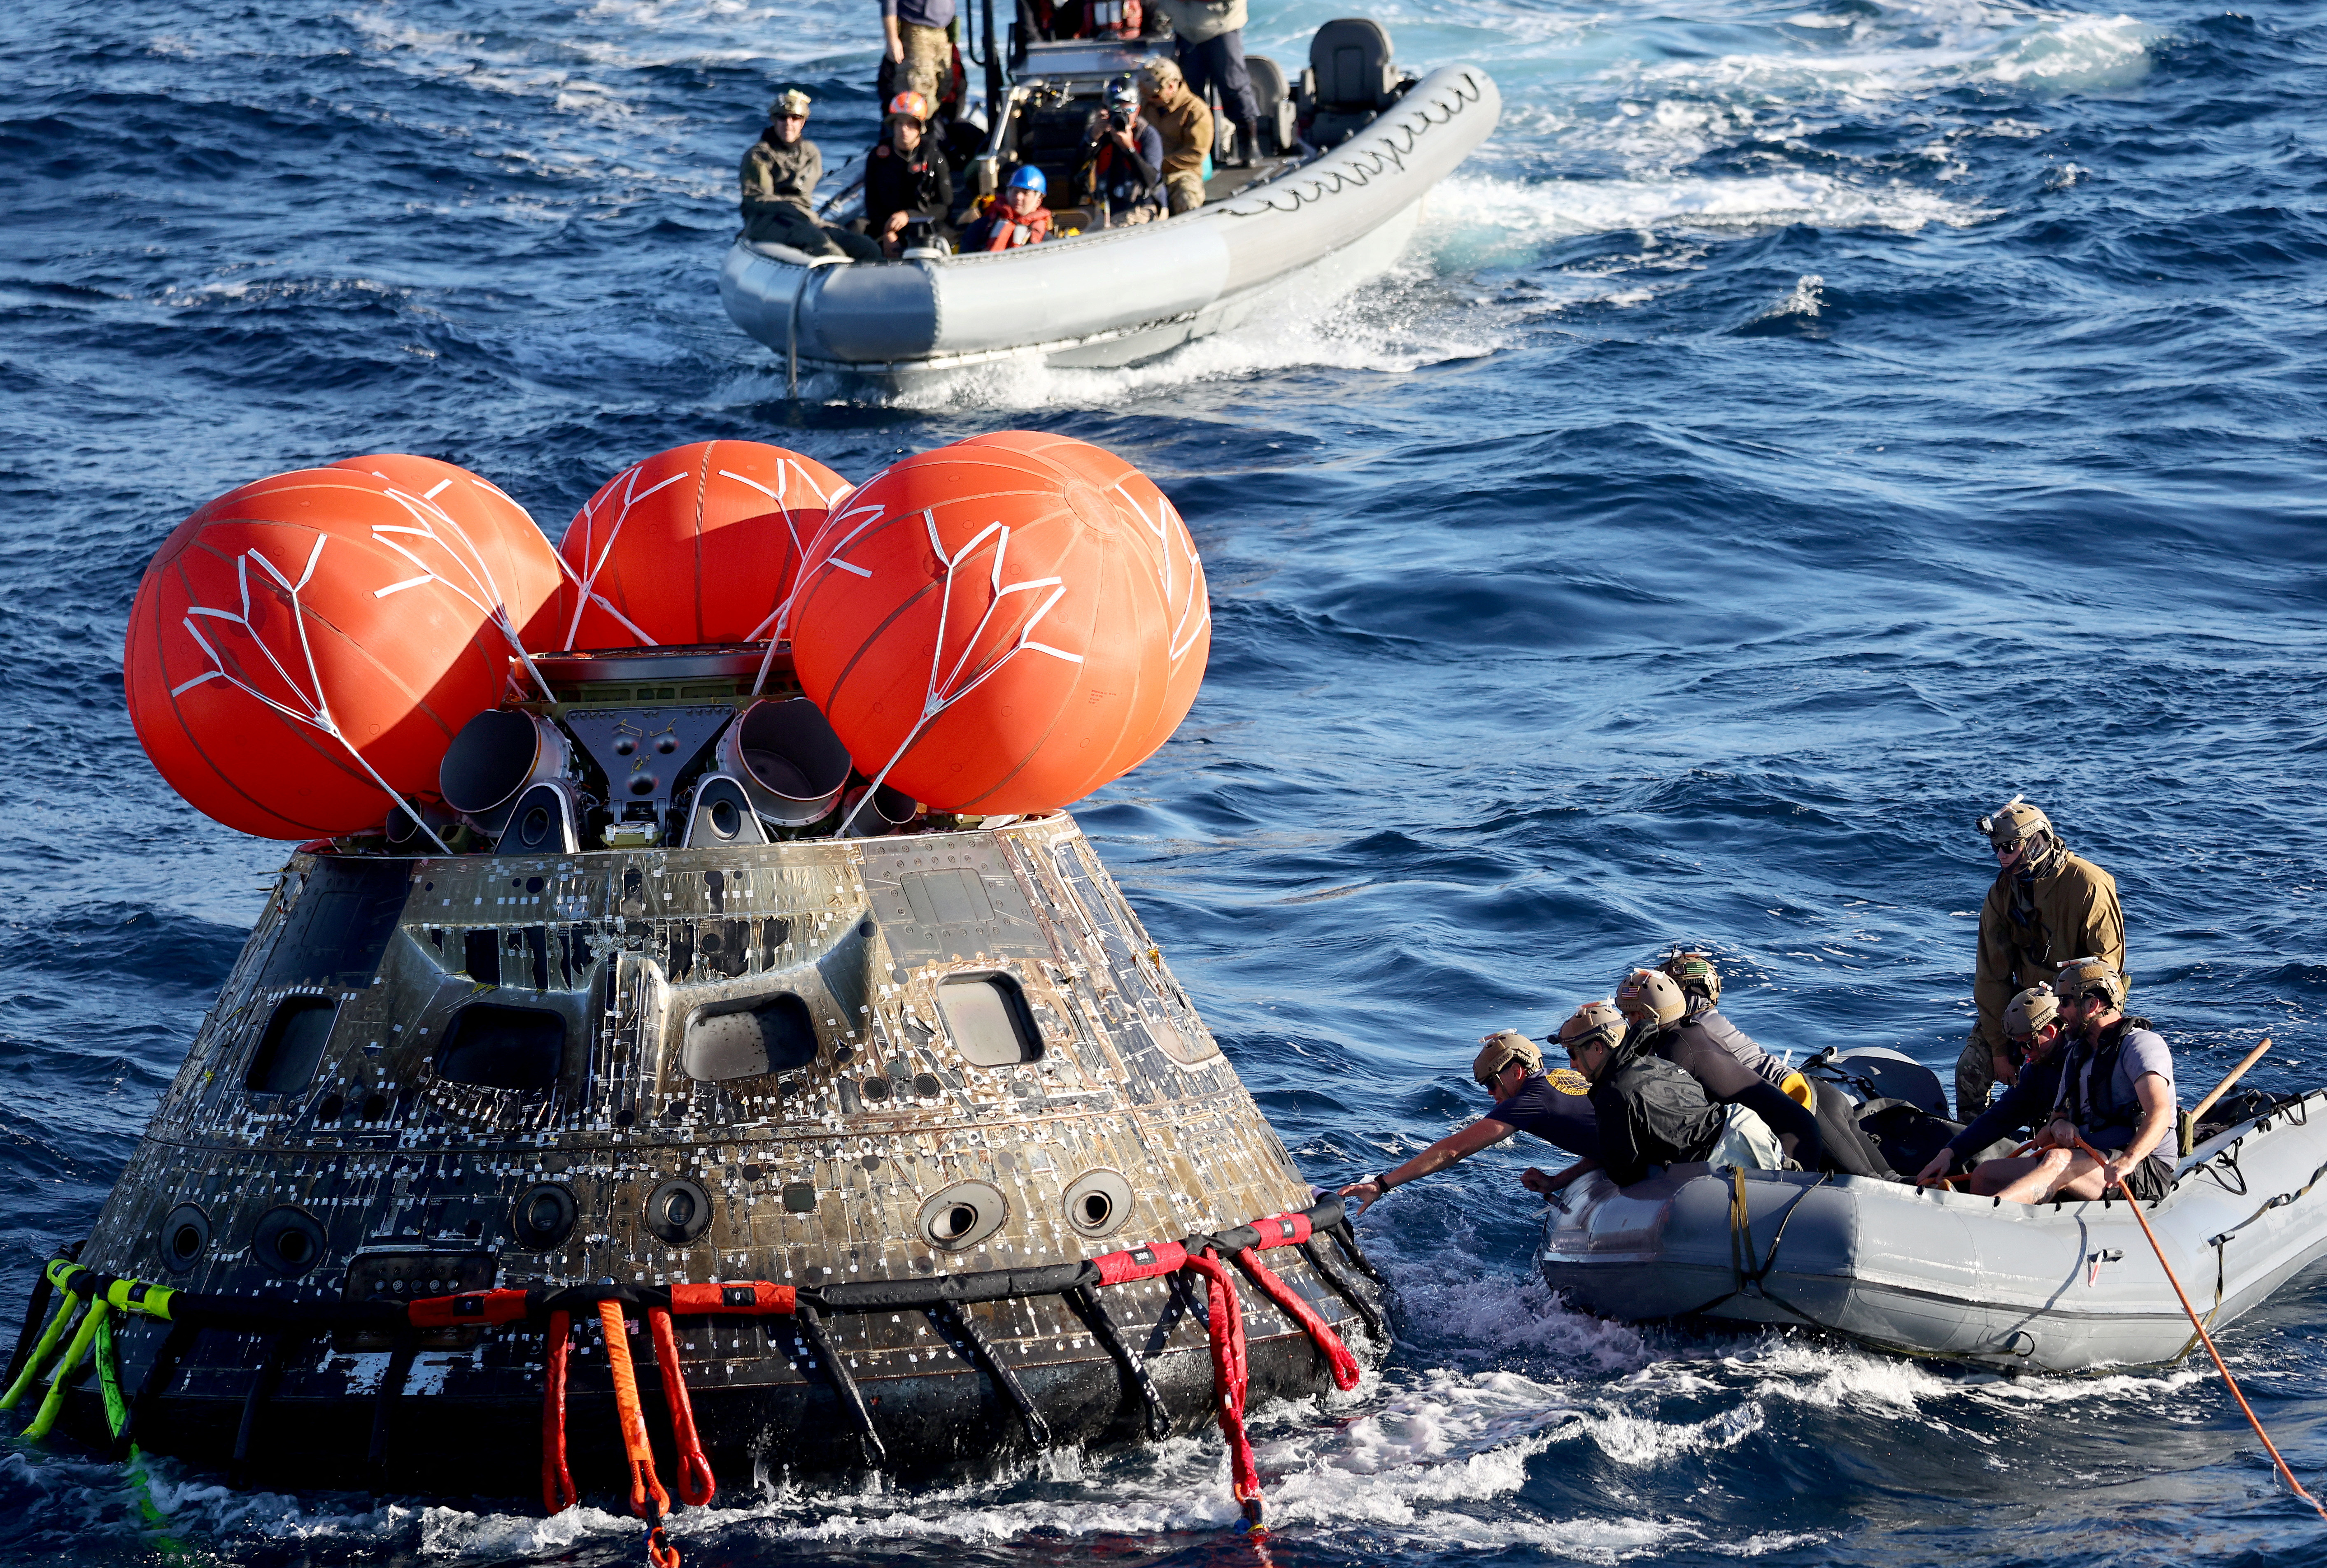 US Navy divers secure NASA's Orion capsule during recovery operations after the successful Artemis I lunar mission (Mario Tama/Pool via REUTERS)